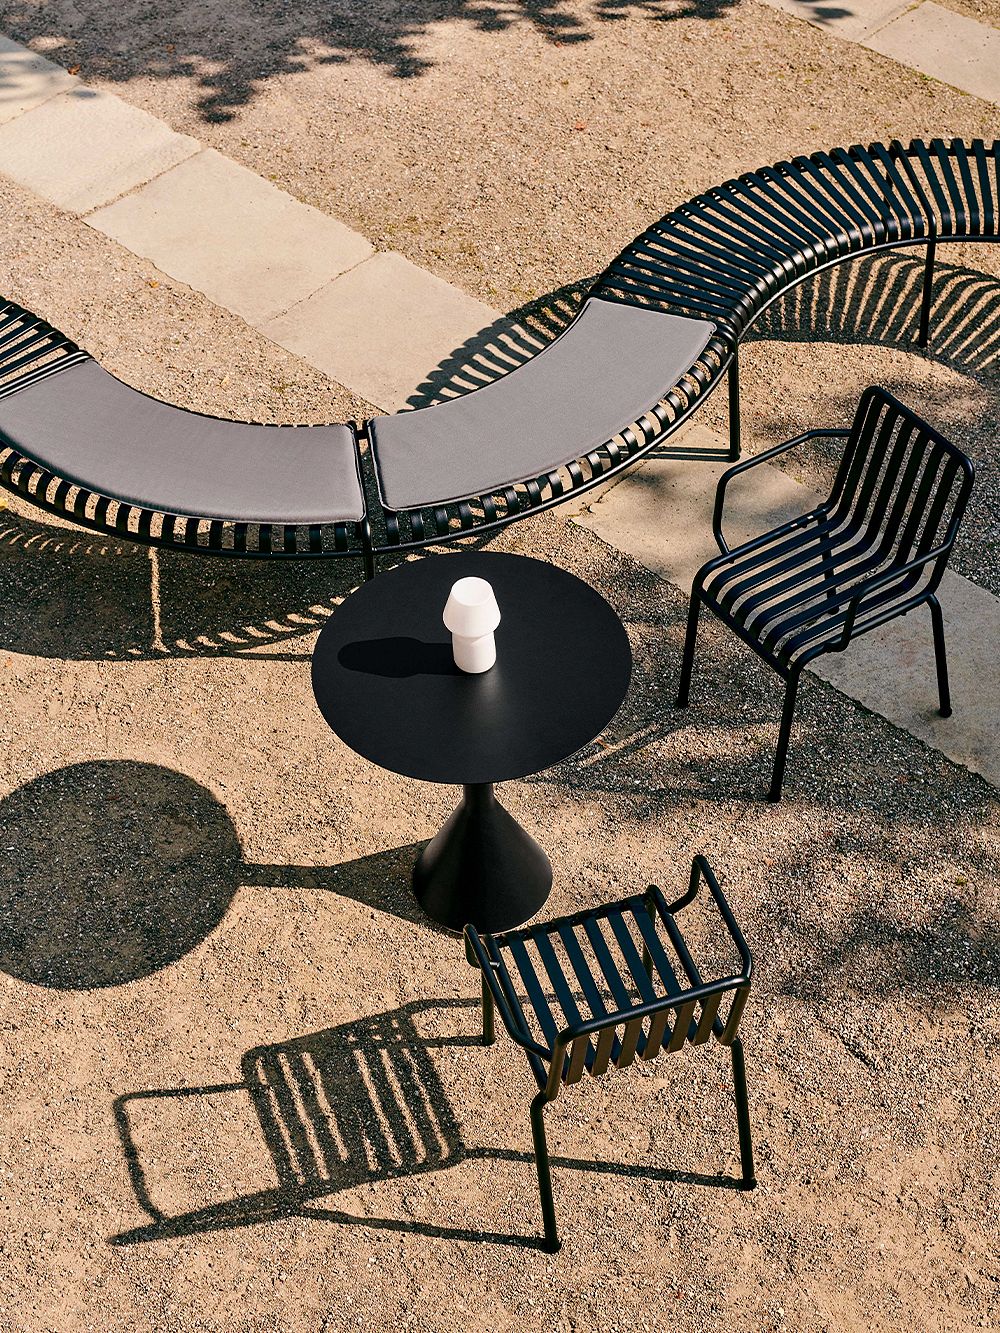 The table, chairs and benches in HAY's Palissade series make up a seating area on a sandy yard.